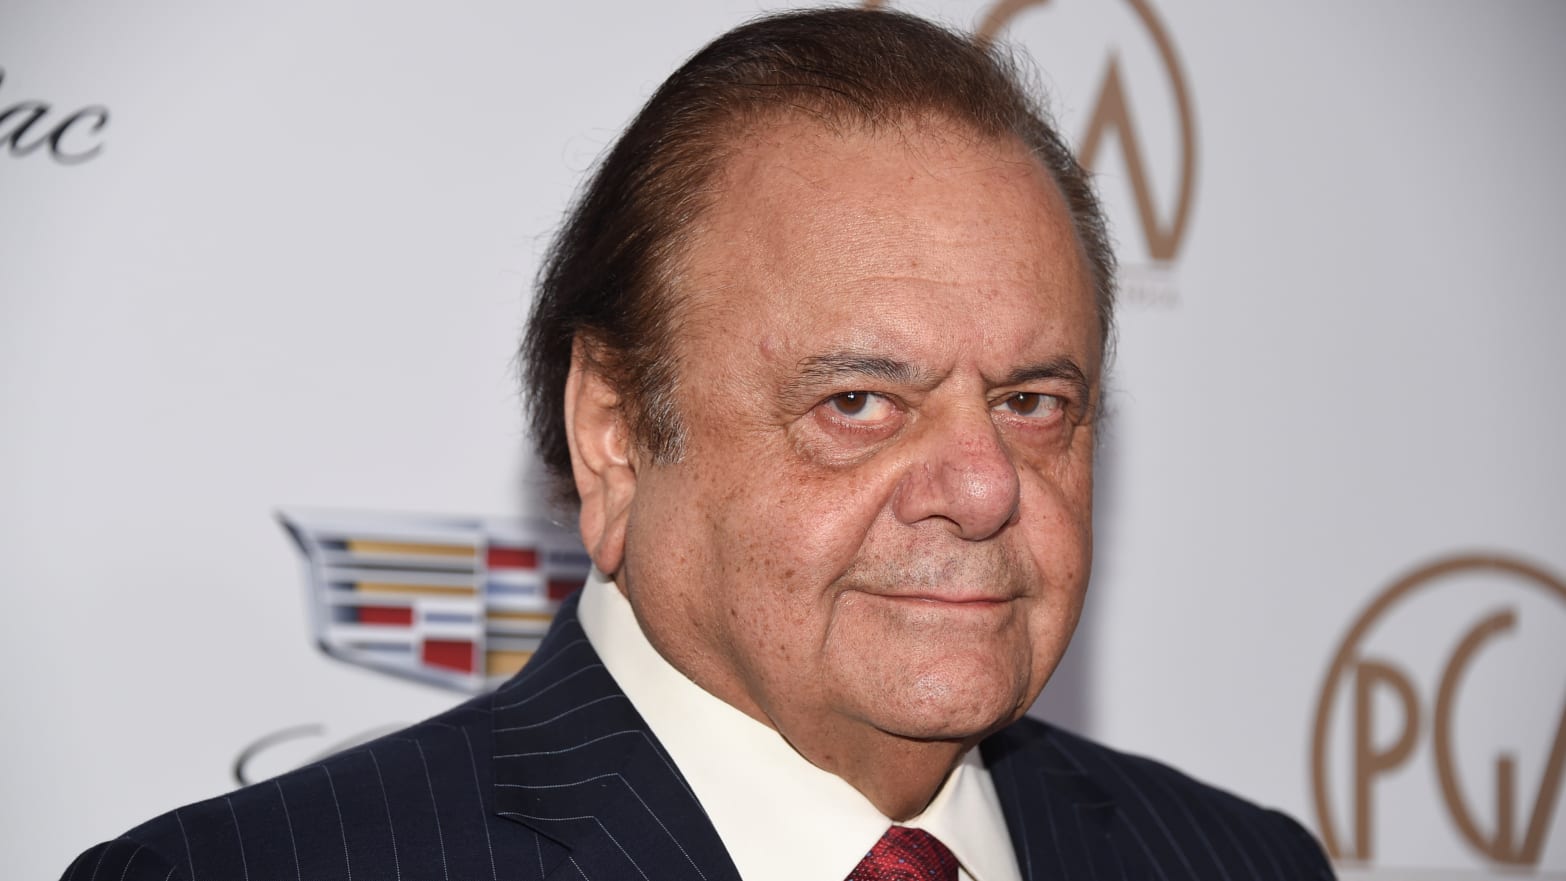 Paul Sorvino’s Family Responds to His Omission From Oscars’ In Memoriam